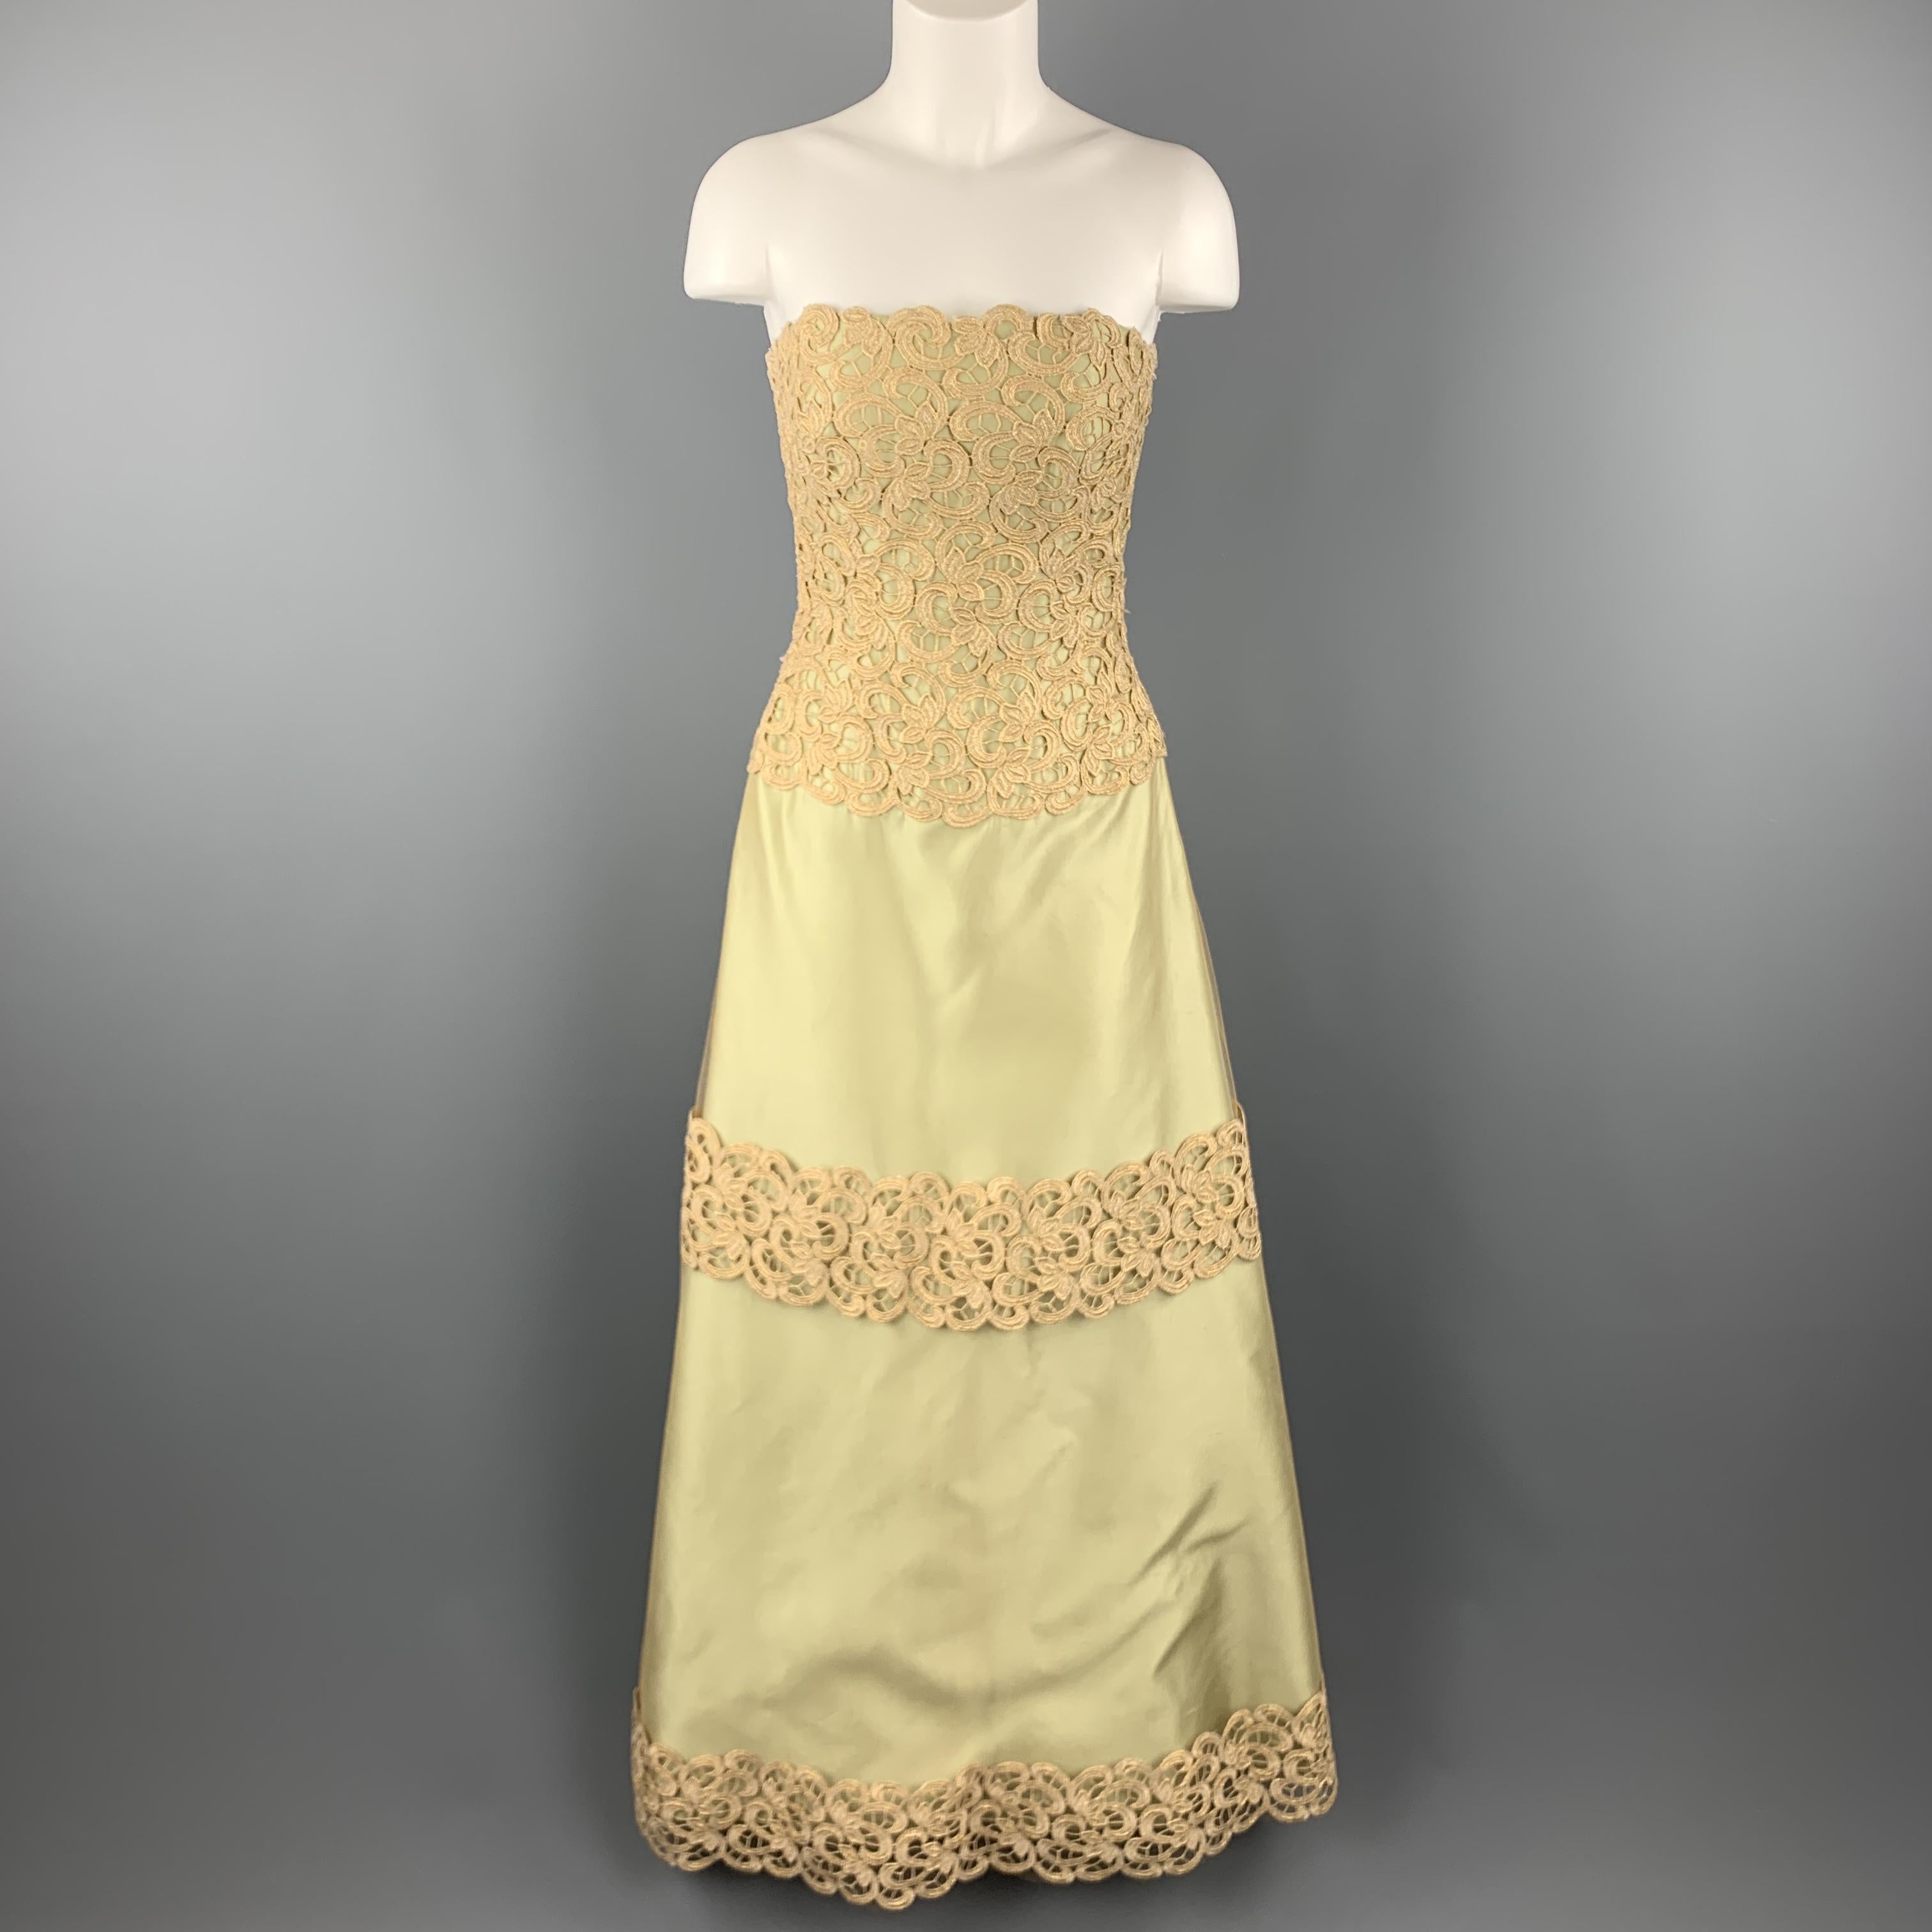 HELEN MORLEY evening gown comes in light green silk taffeta with a metallic gold tulle overlay and features a metallic lace overlay, strapless bustier bodice and full side pleat A line skirt with lace stripe appliques. Includes a matching shoulder